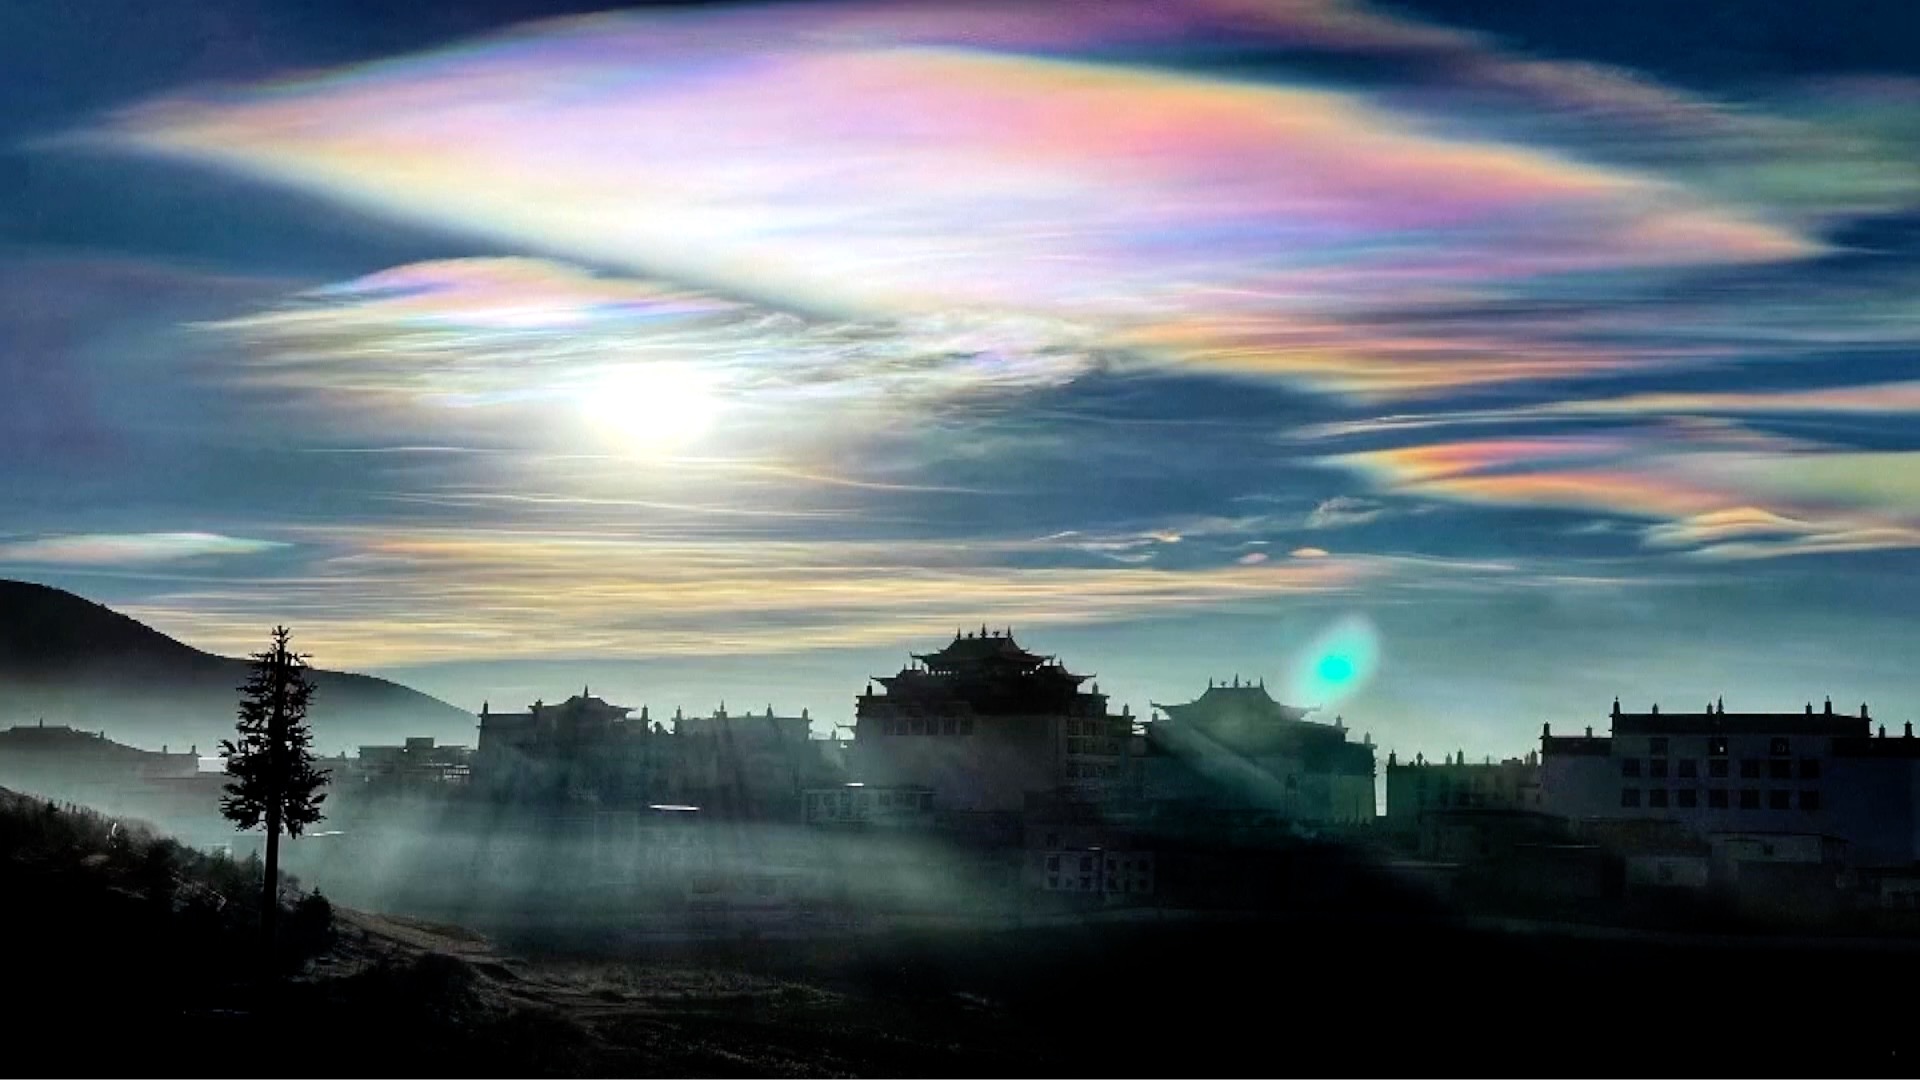 Iridescent clouds appear in SW China - CGTN